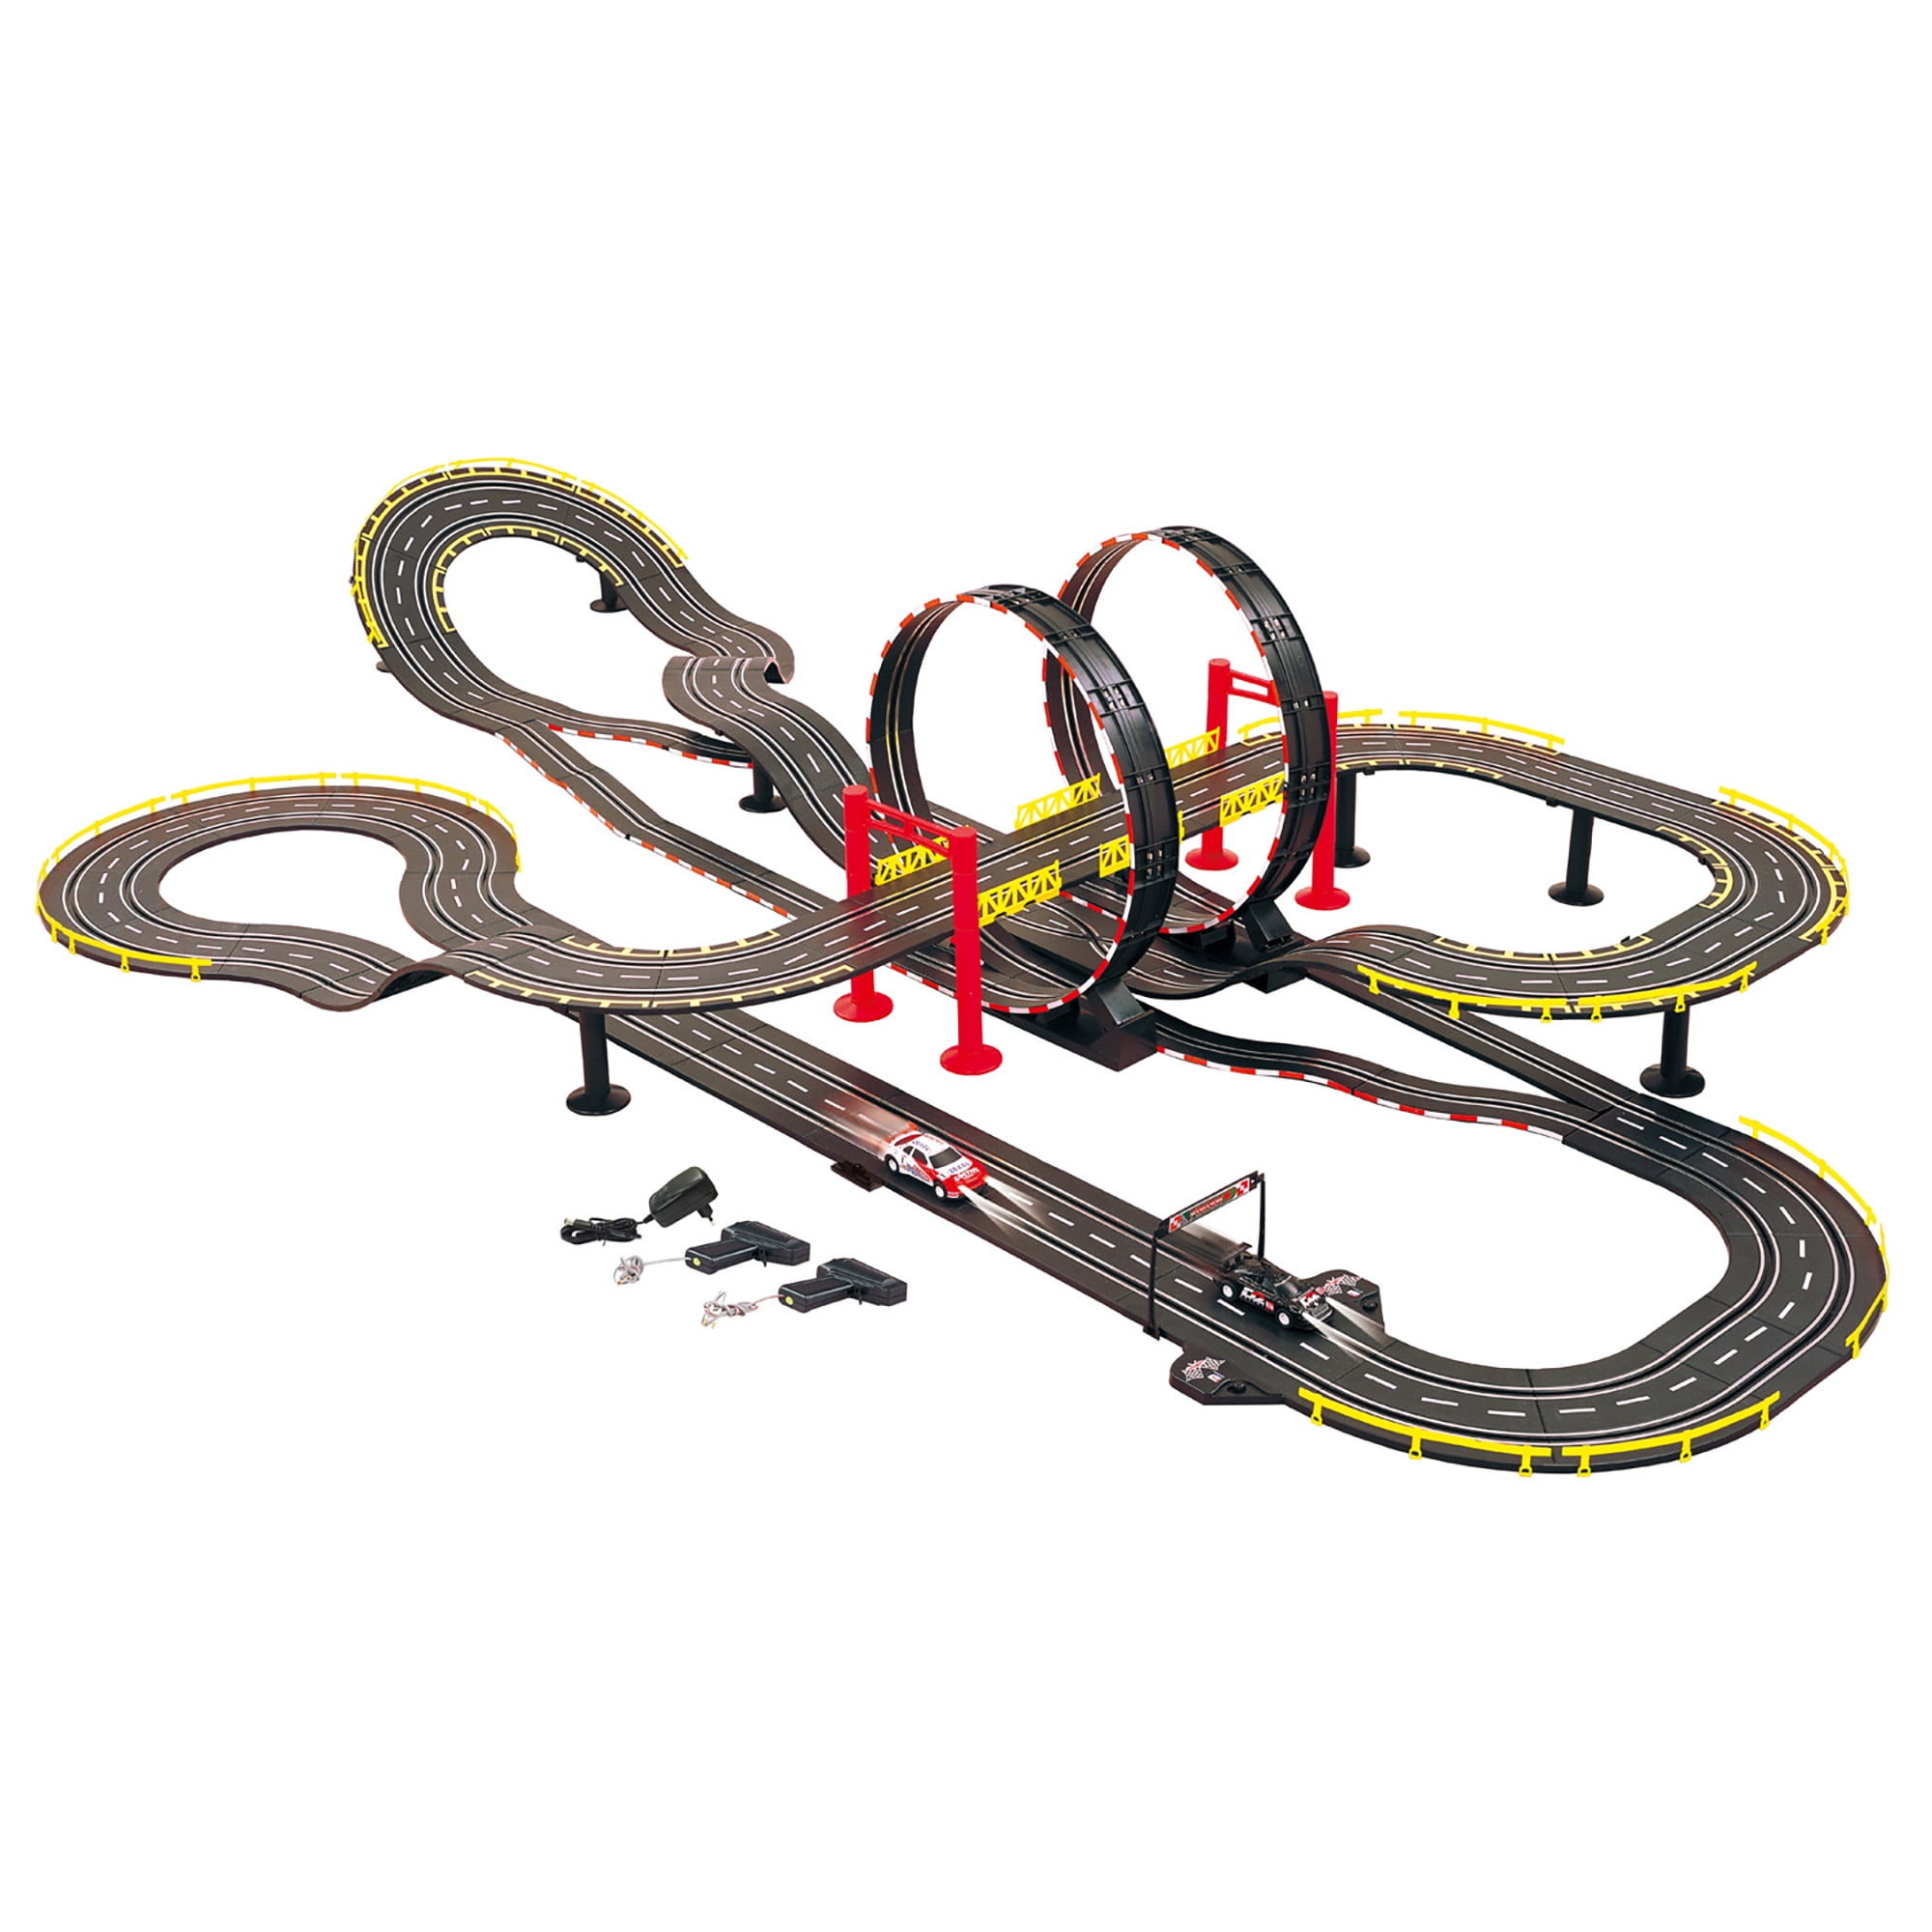 Big Loop Chaser Electric Slot Car Road Racing Set Over 50 feet of Track.4 Cars 